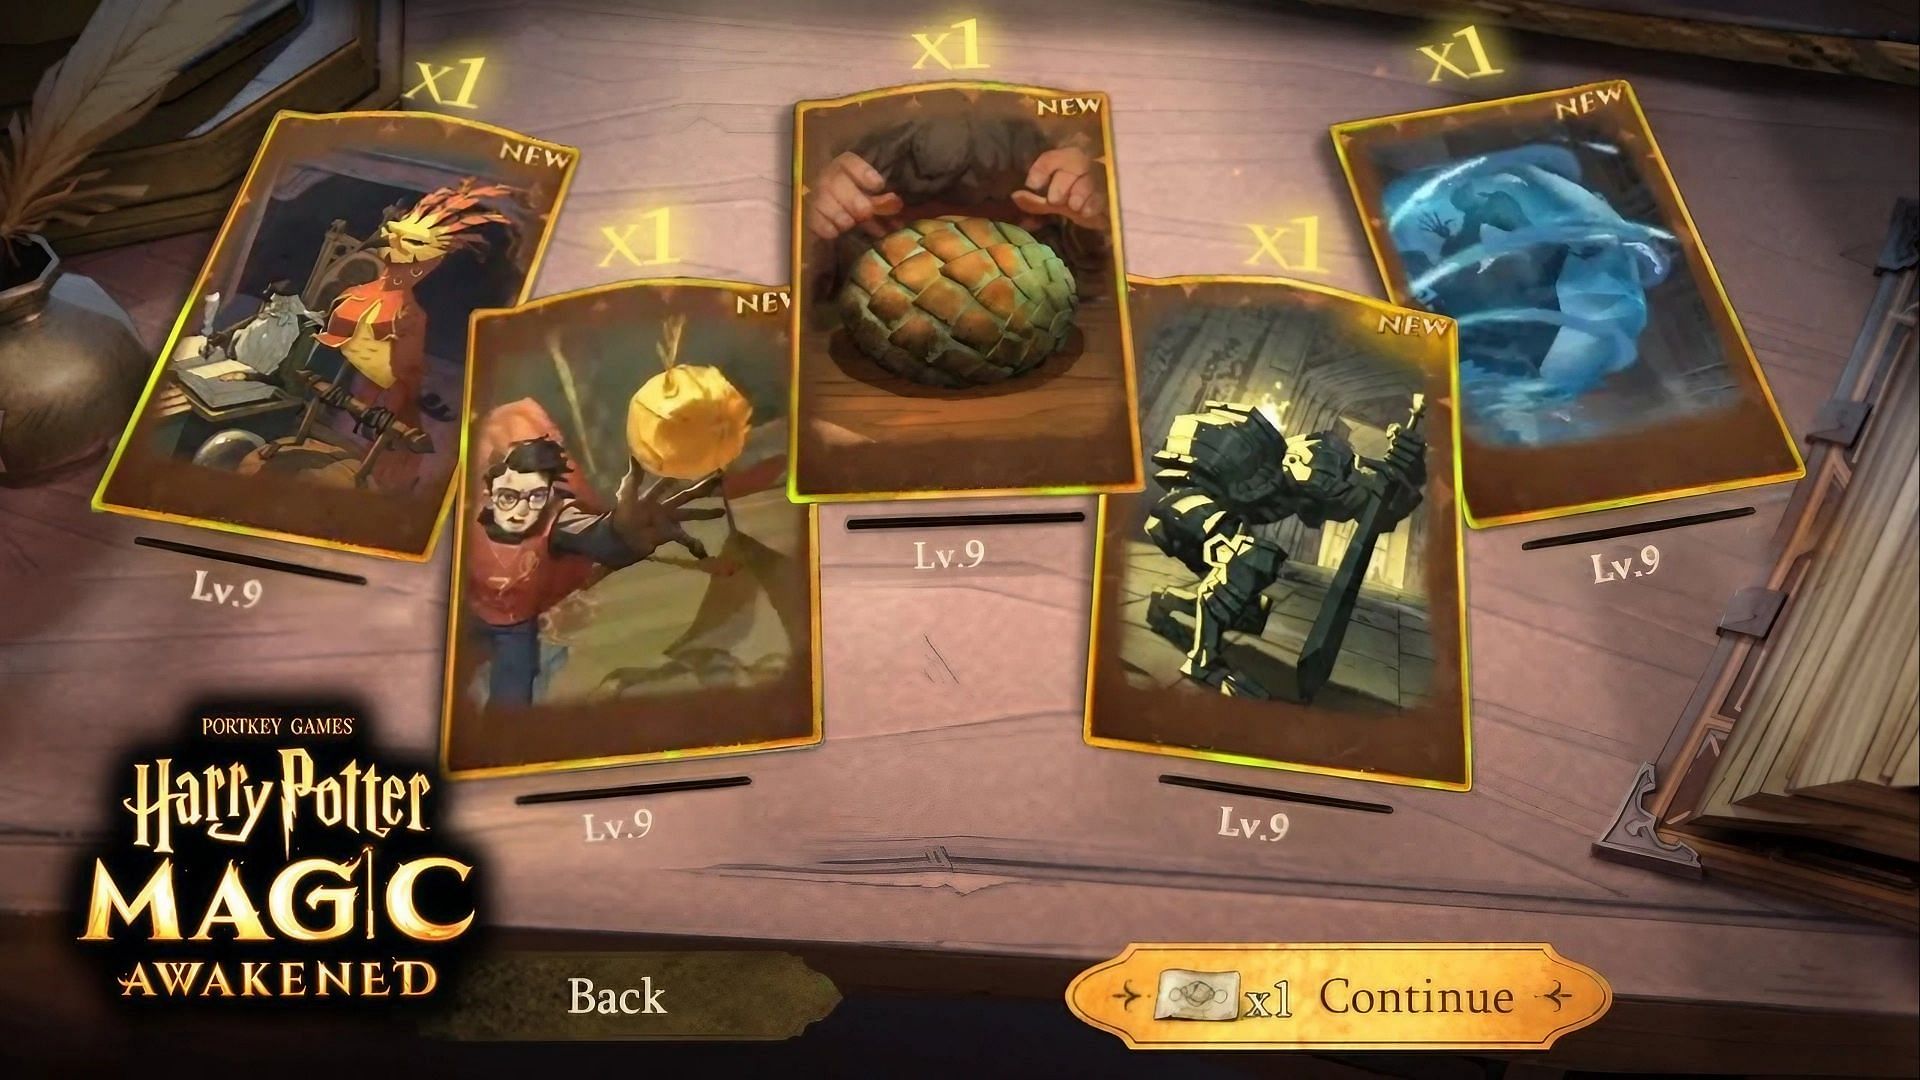 Rerolling in Harry Potter Magic Awakened allows you to pick the legendary card you want (Image via Portkey Games)